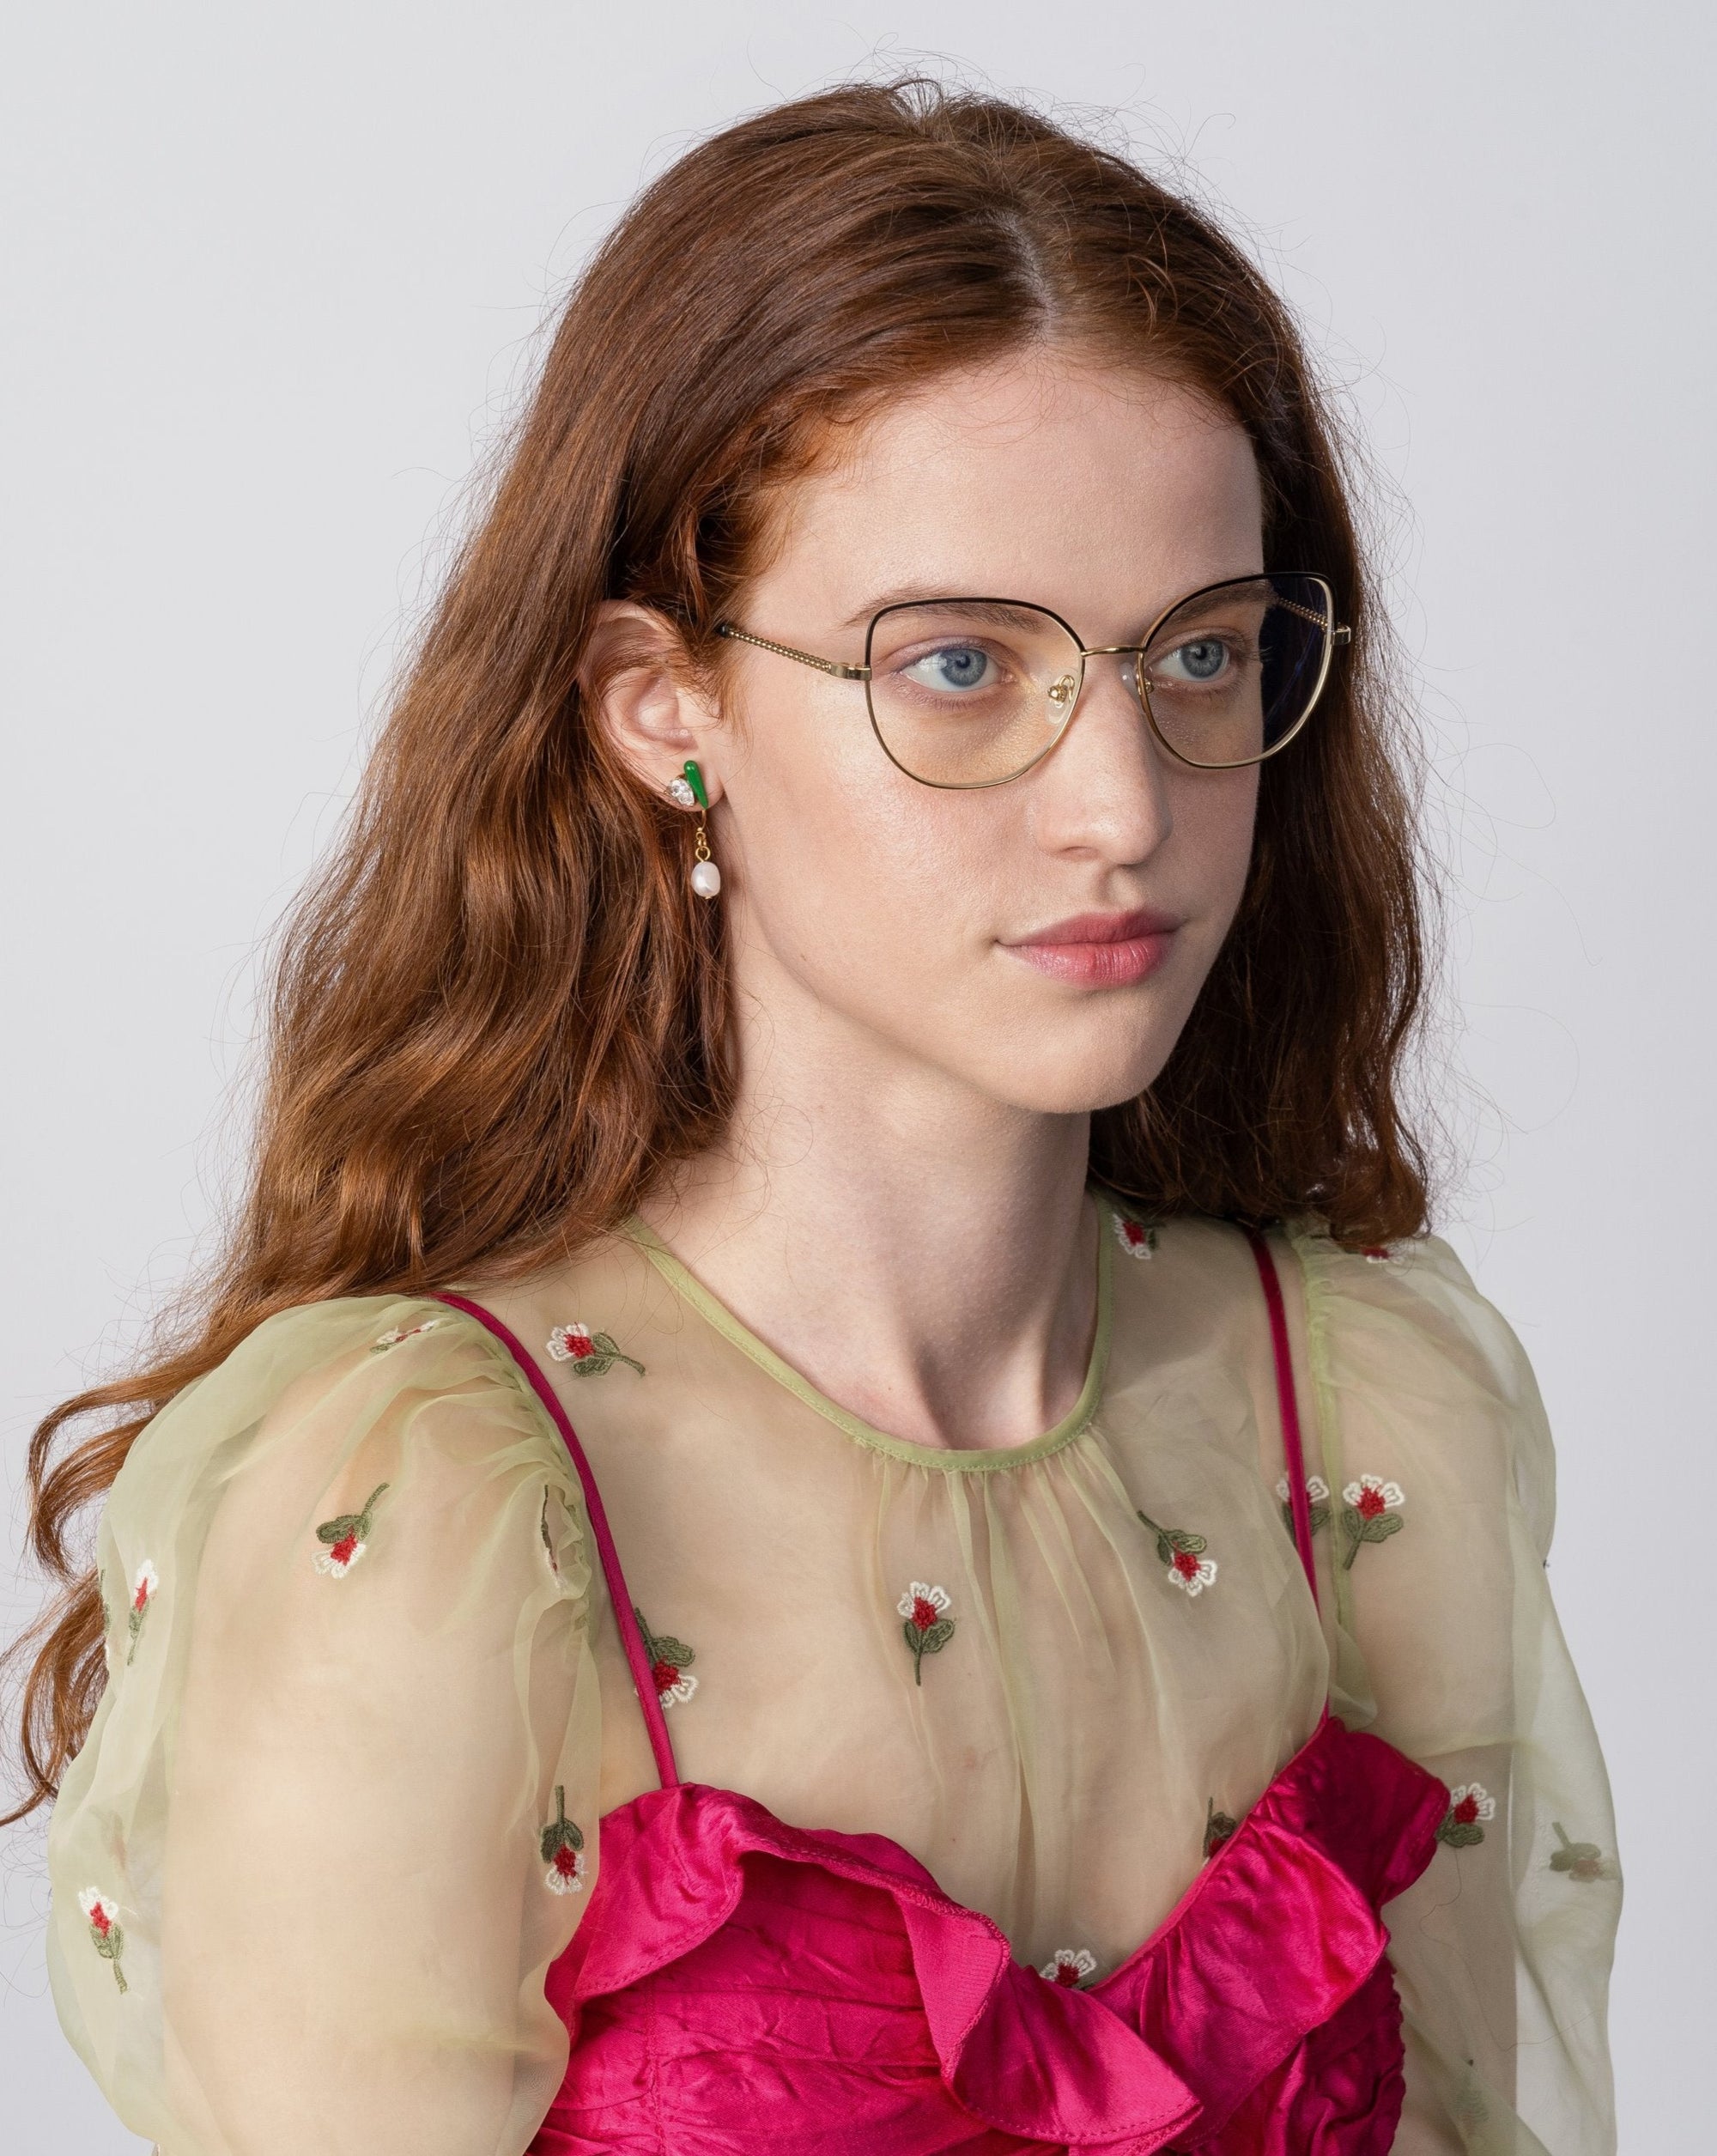 A woman with long, wavy red hair, wearing Ophelia glasses by For Art&#39;s Sake® with a cat-eye silhouette and green-and-gold earrings, is dressed in a sheer, light green blouse with embroidered flowers over a bright pink, textured top. She is looking slightly to the side against a plain, light gray background.